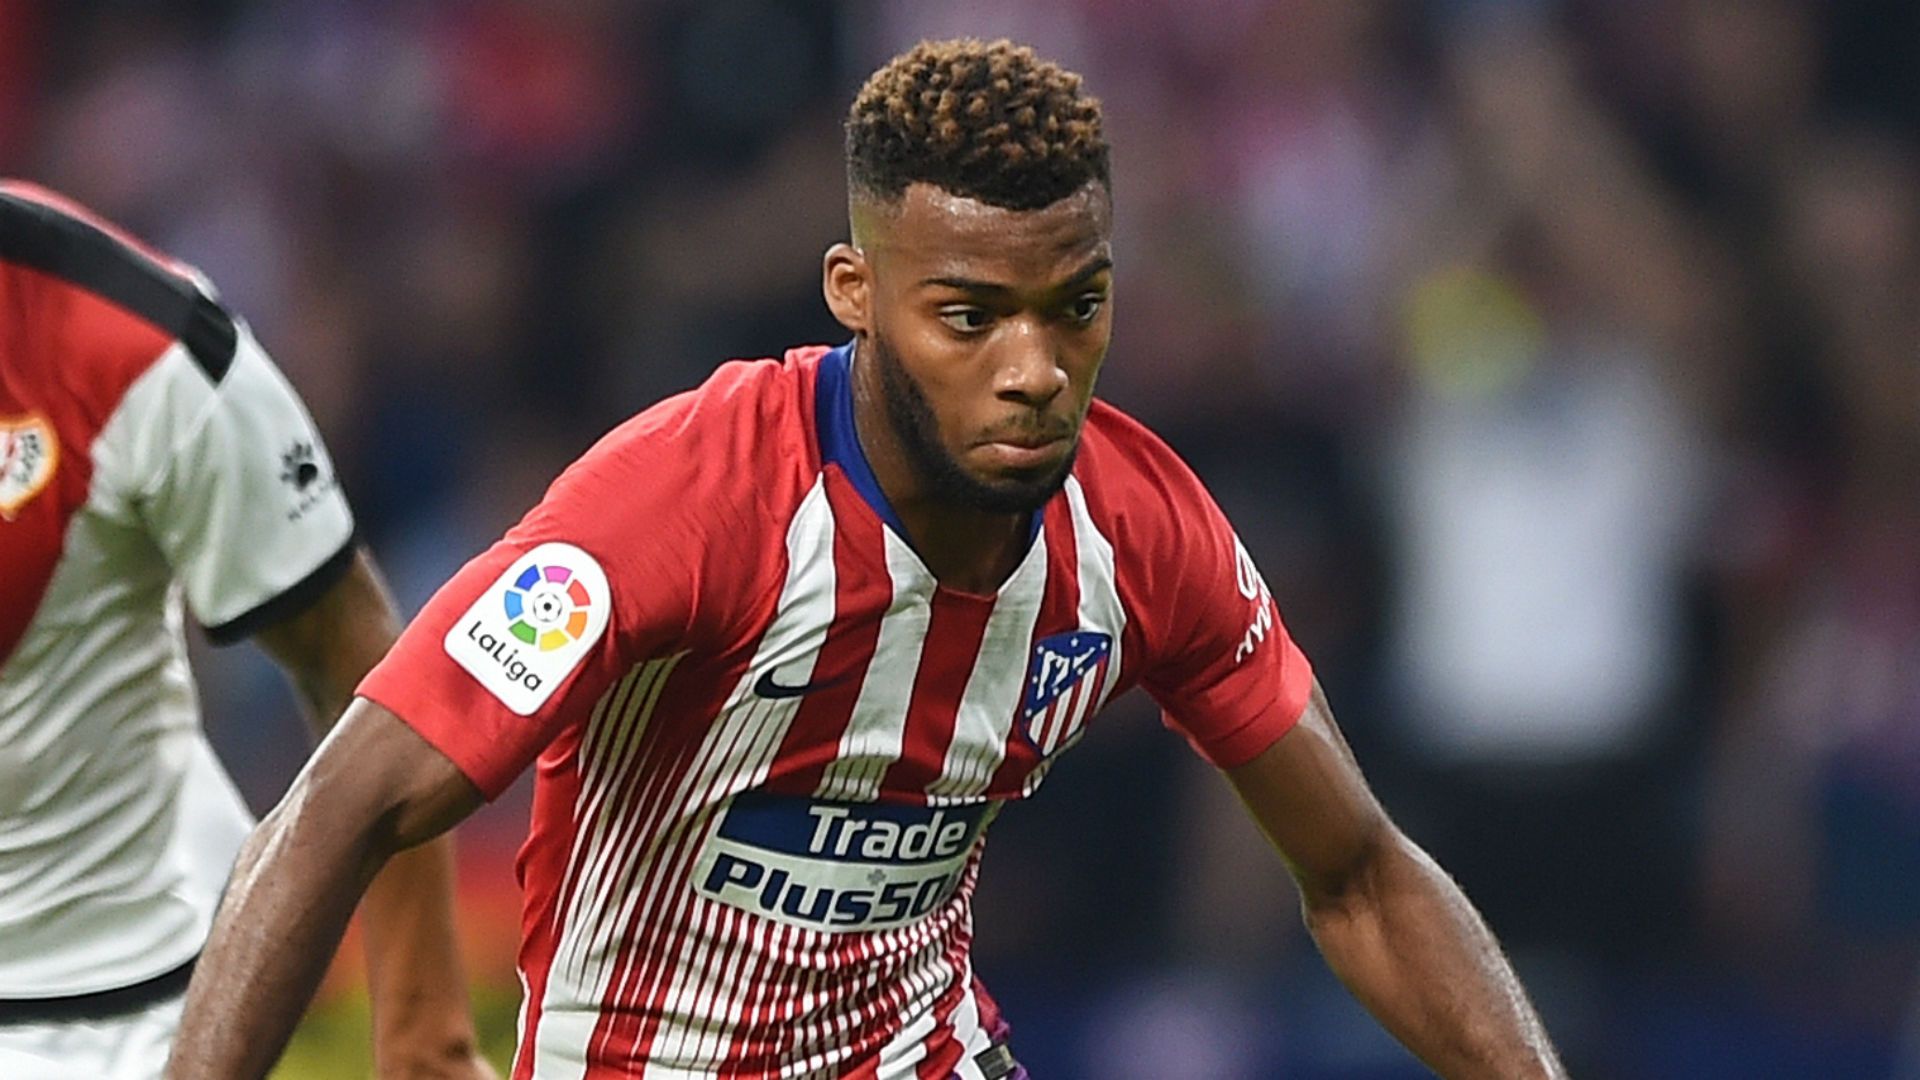 Atletico Madrid news: Simeone expects Griezmann & Lemar to improve